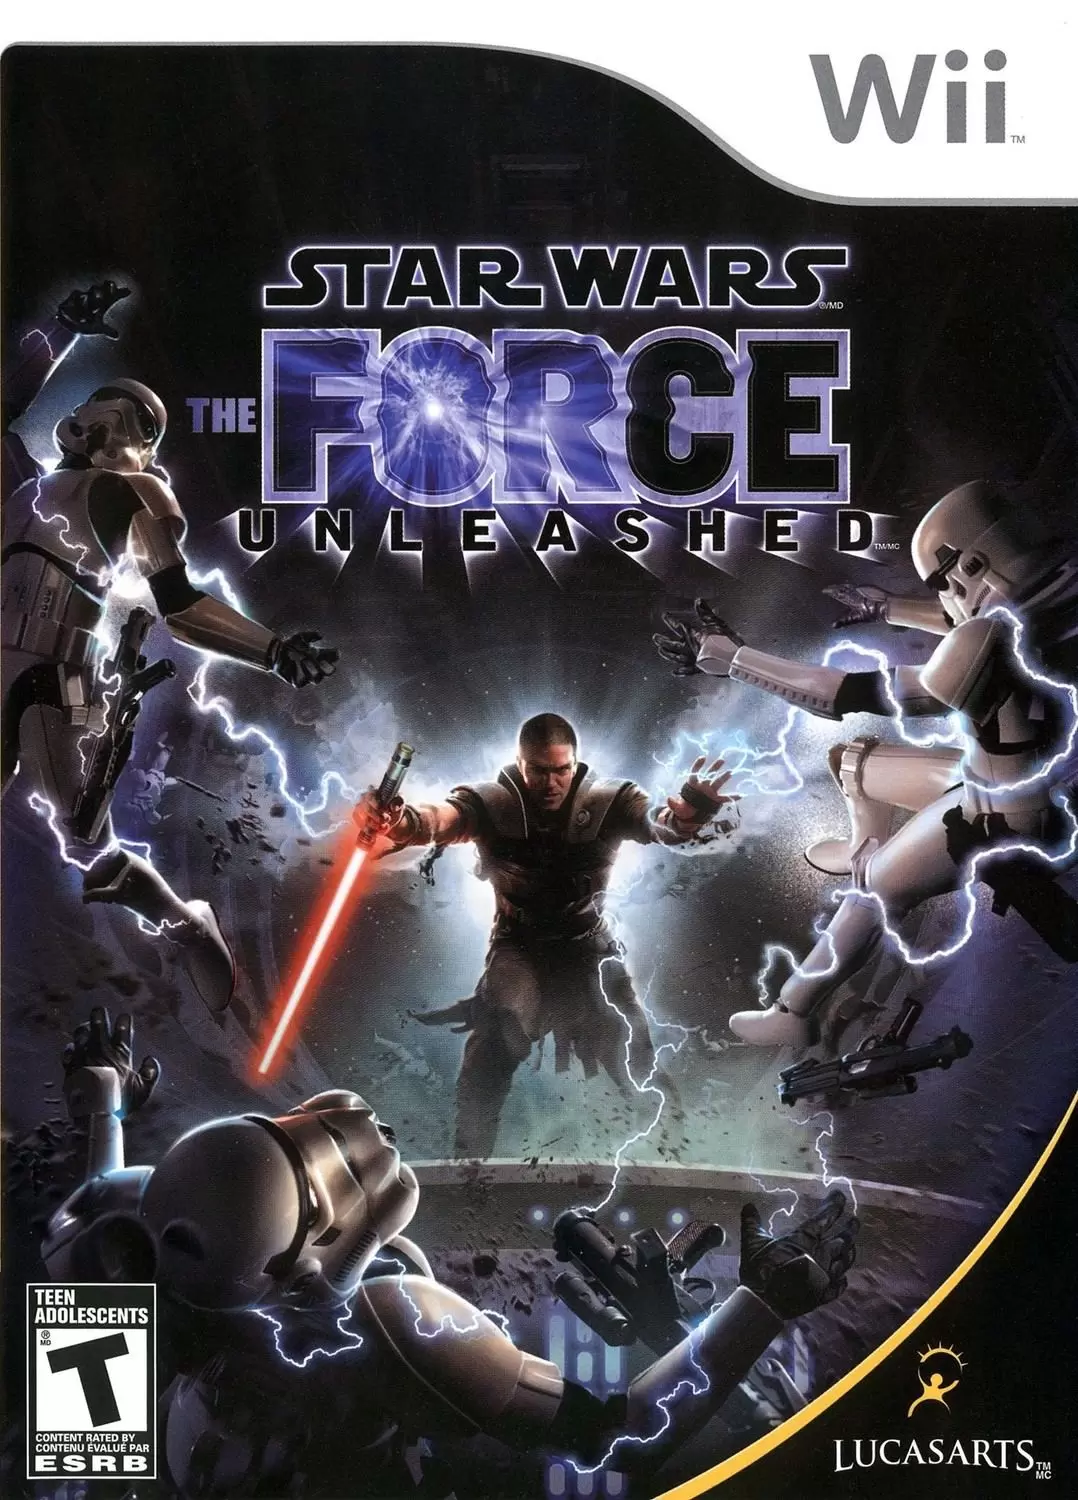 Nintendo Wii Games - Star Wars: The Force Unleashed